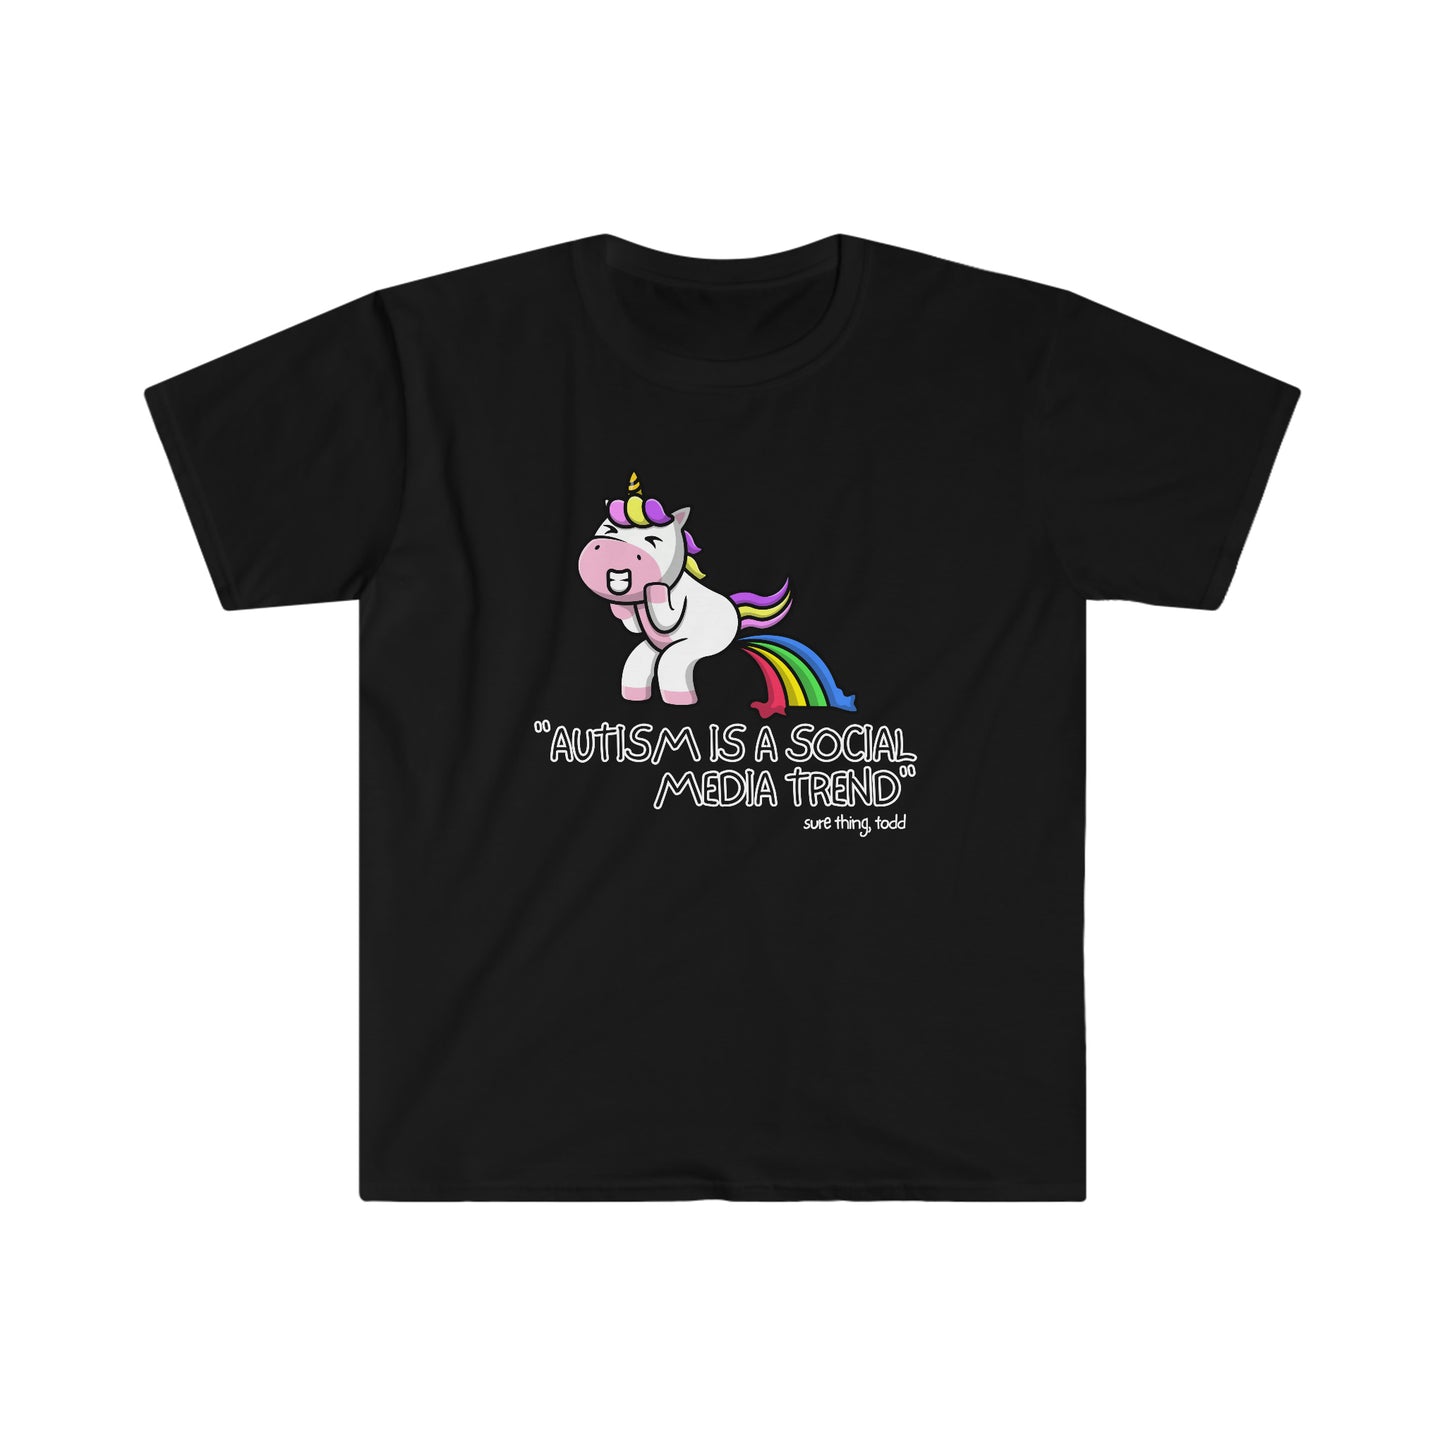 "Autism is a Social Media Trend" Unisex Softstyle T-Shirt